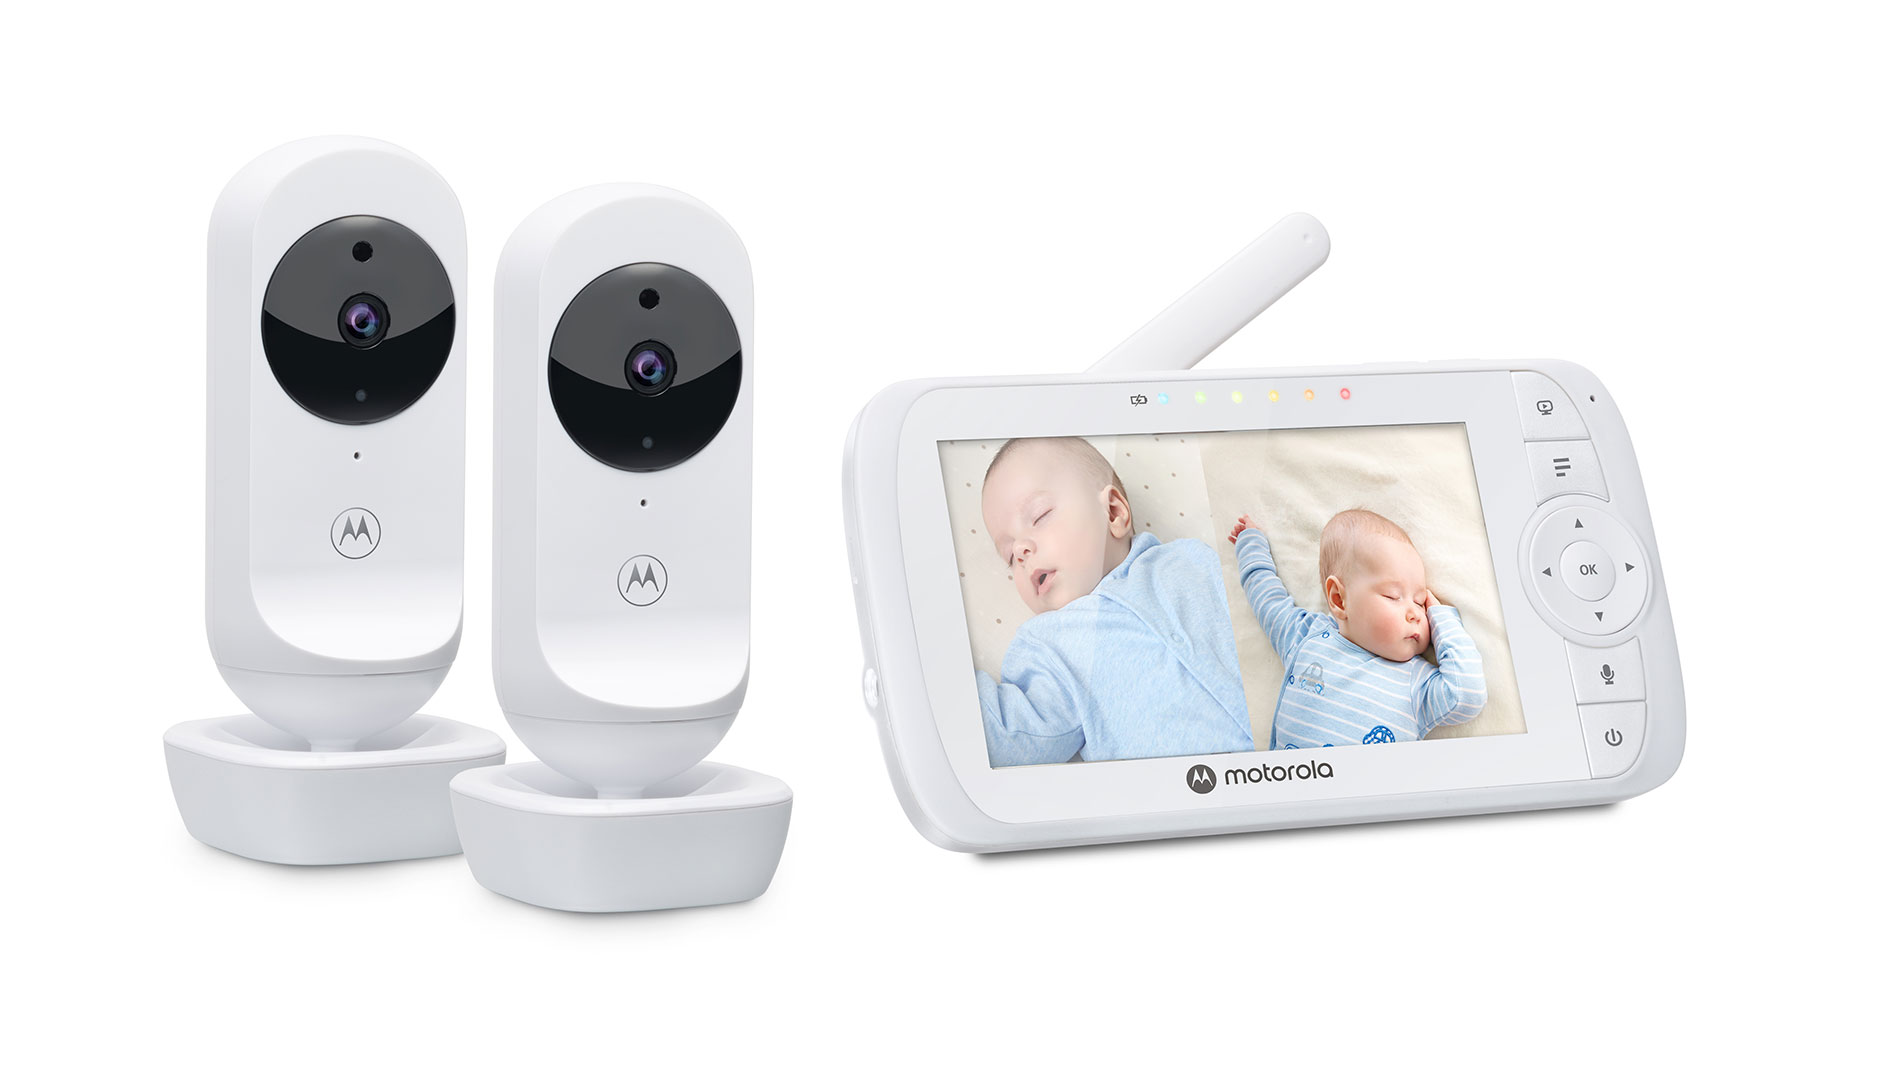 VM35-2 5 Inch Video Baby Monitor - right side - Product image